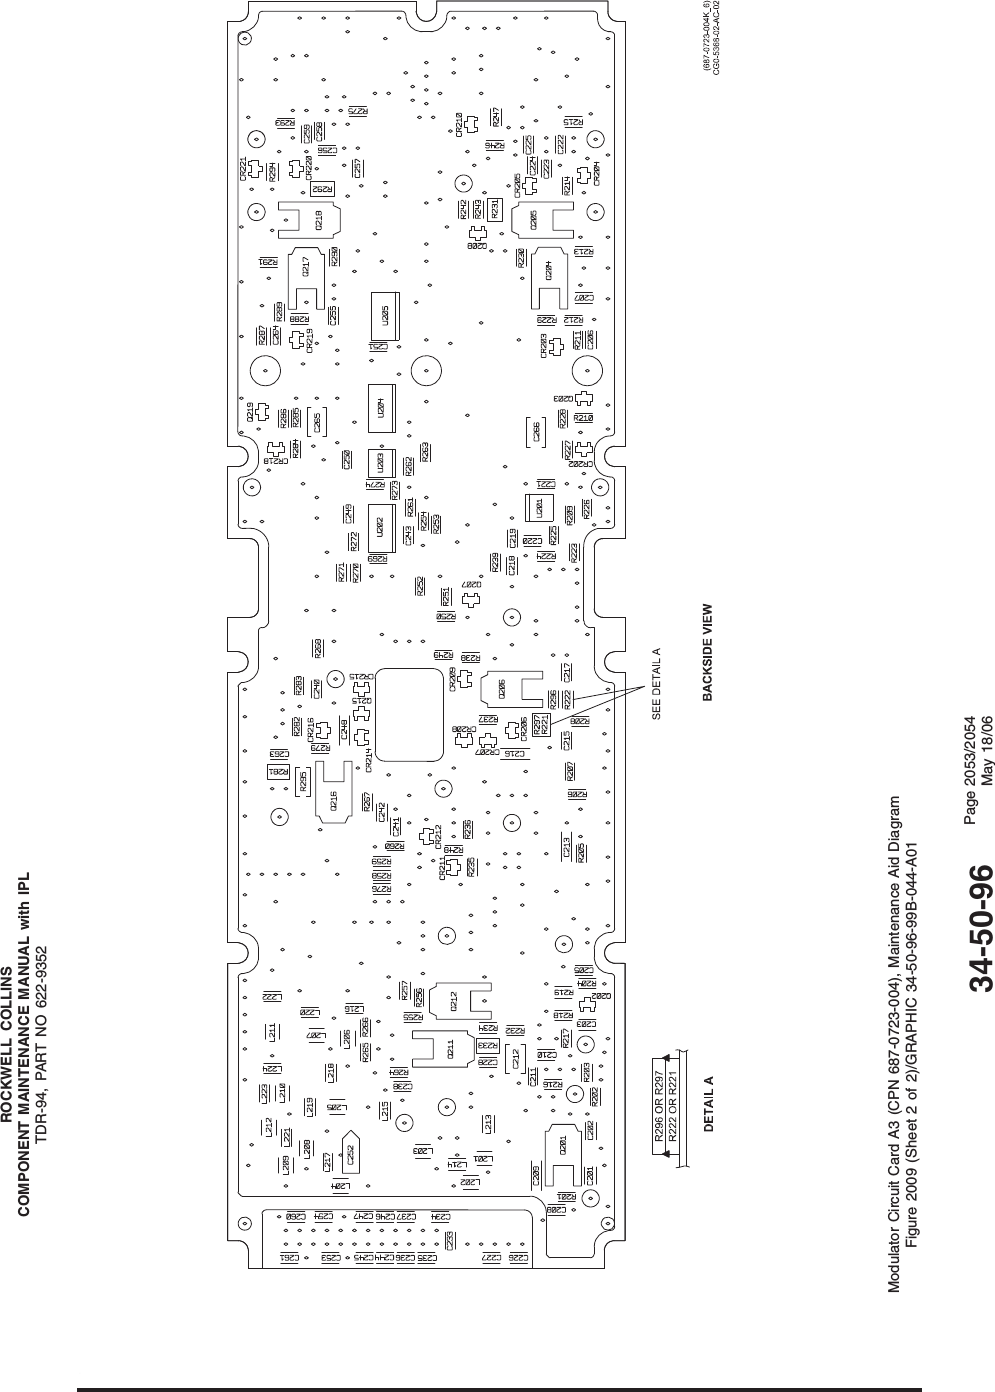 ROCKWELL COLLINSCOMPONENT MAINTENANCE MANUAL with IPLTDR-94, PART NO 622-9352Modulator Circuit Card A3 (CPN 687-0723-004), Maintenance Aid DiagramFigure 2009 (Sheet 2 of 2)/GRAPHIC 34-50-96-99B-044-A0134-50-96 Page 2053/2054May 18/06